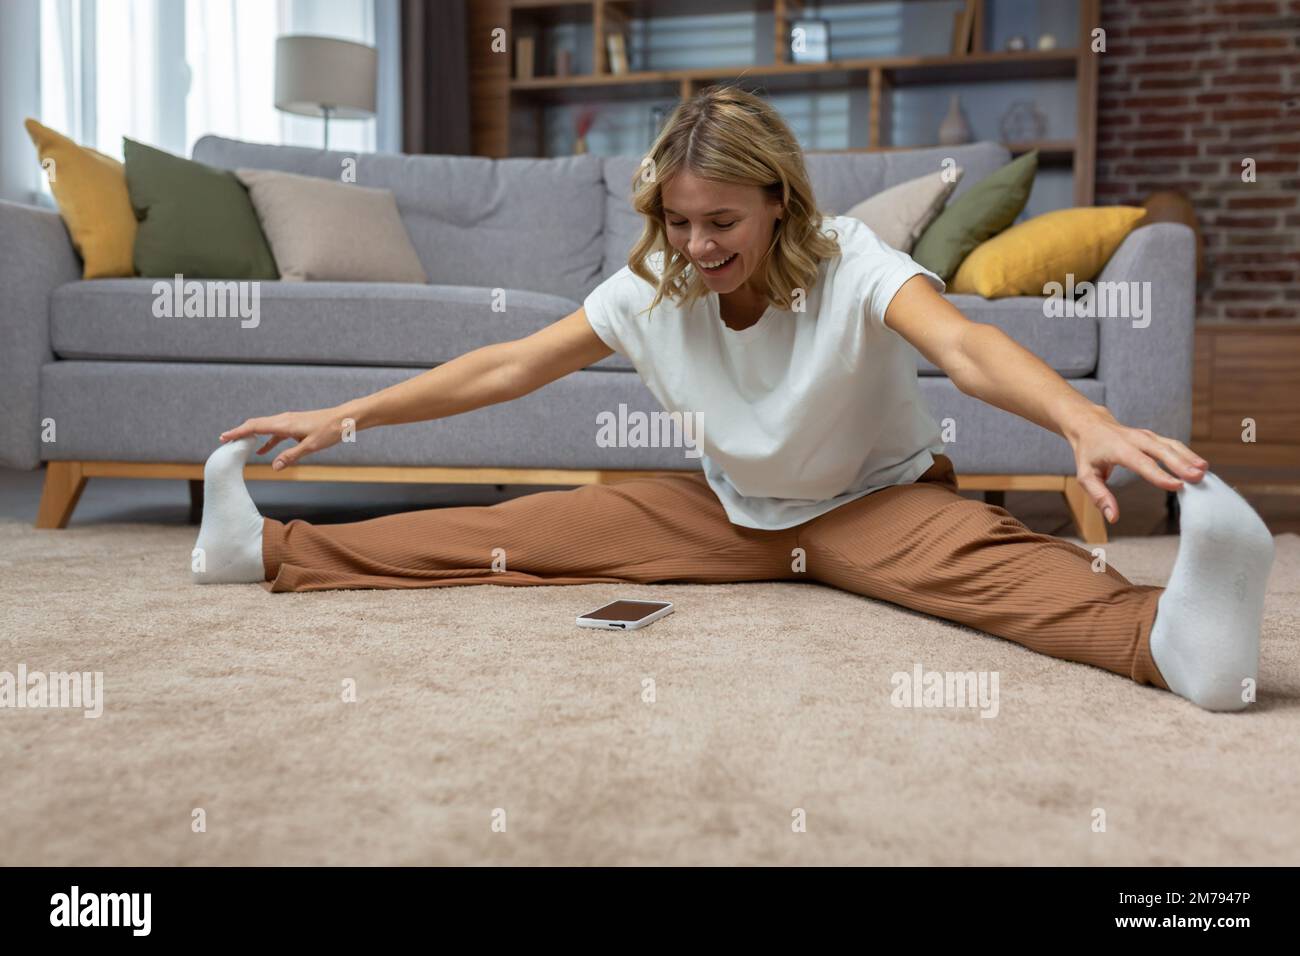 Smiling active blonde senior woman on floor doing stretches and exercises, using phone and online workout app at home in living room. Stock Photo